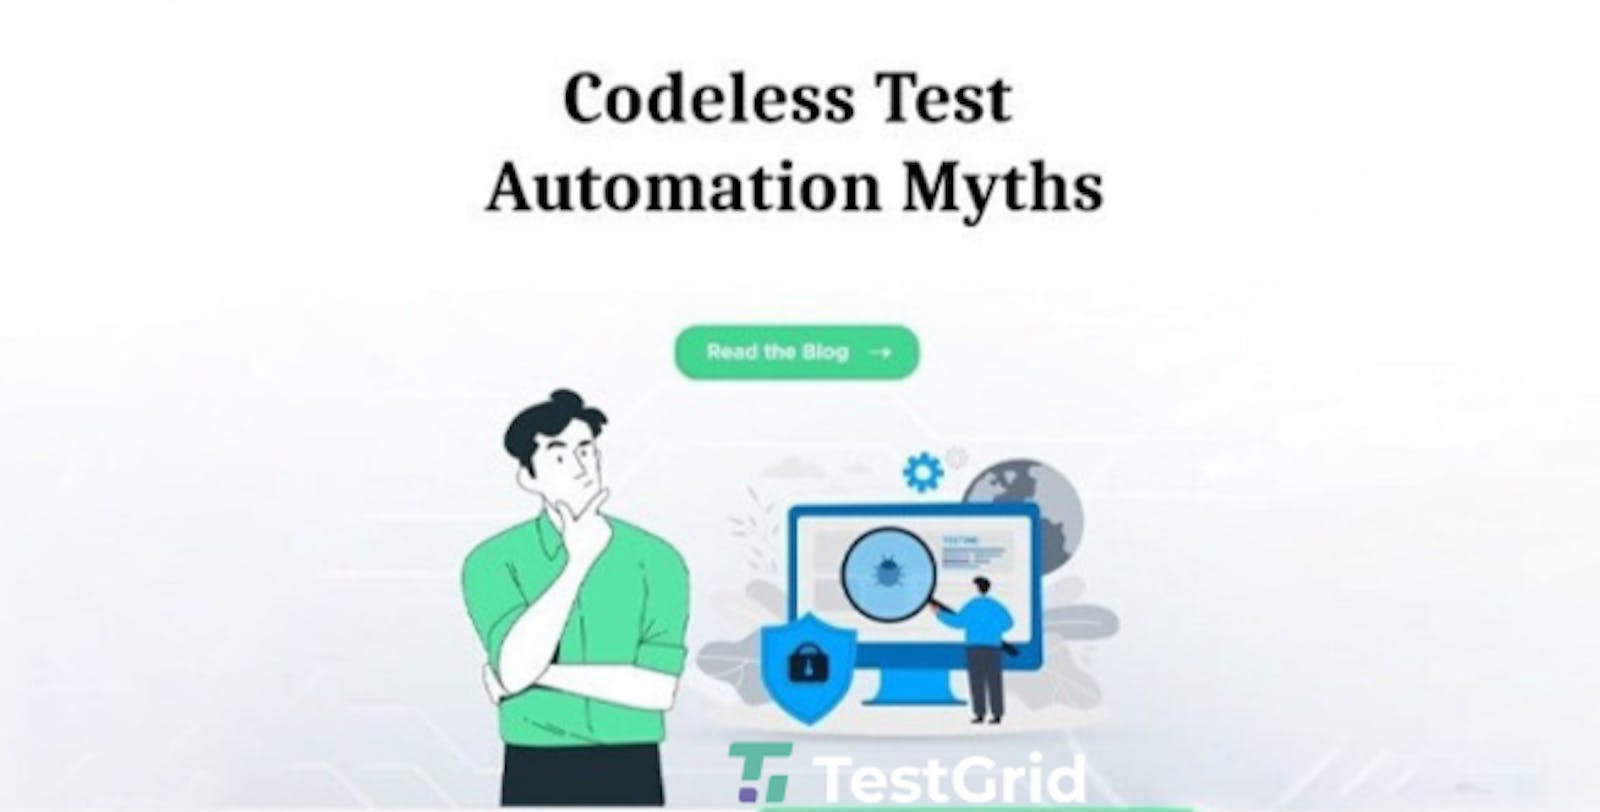 Know the Myths About Codeless Test Automation and their Truths